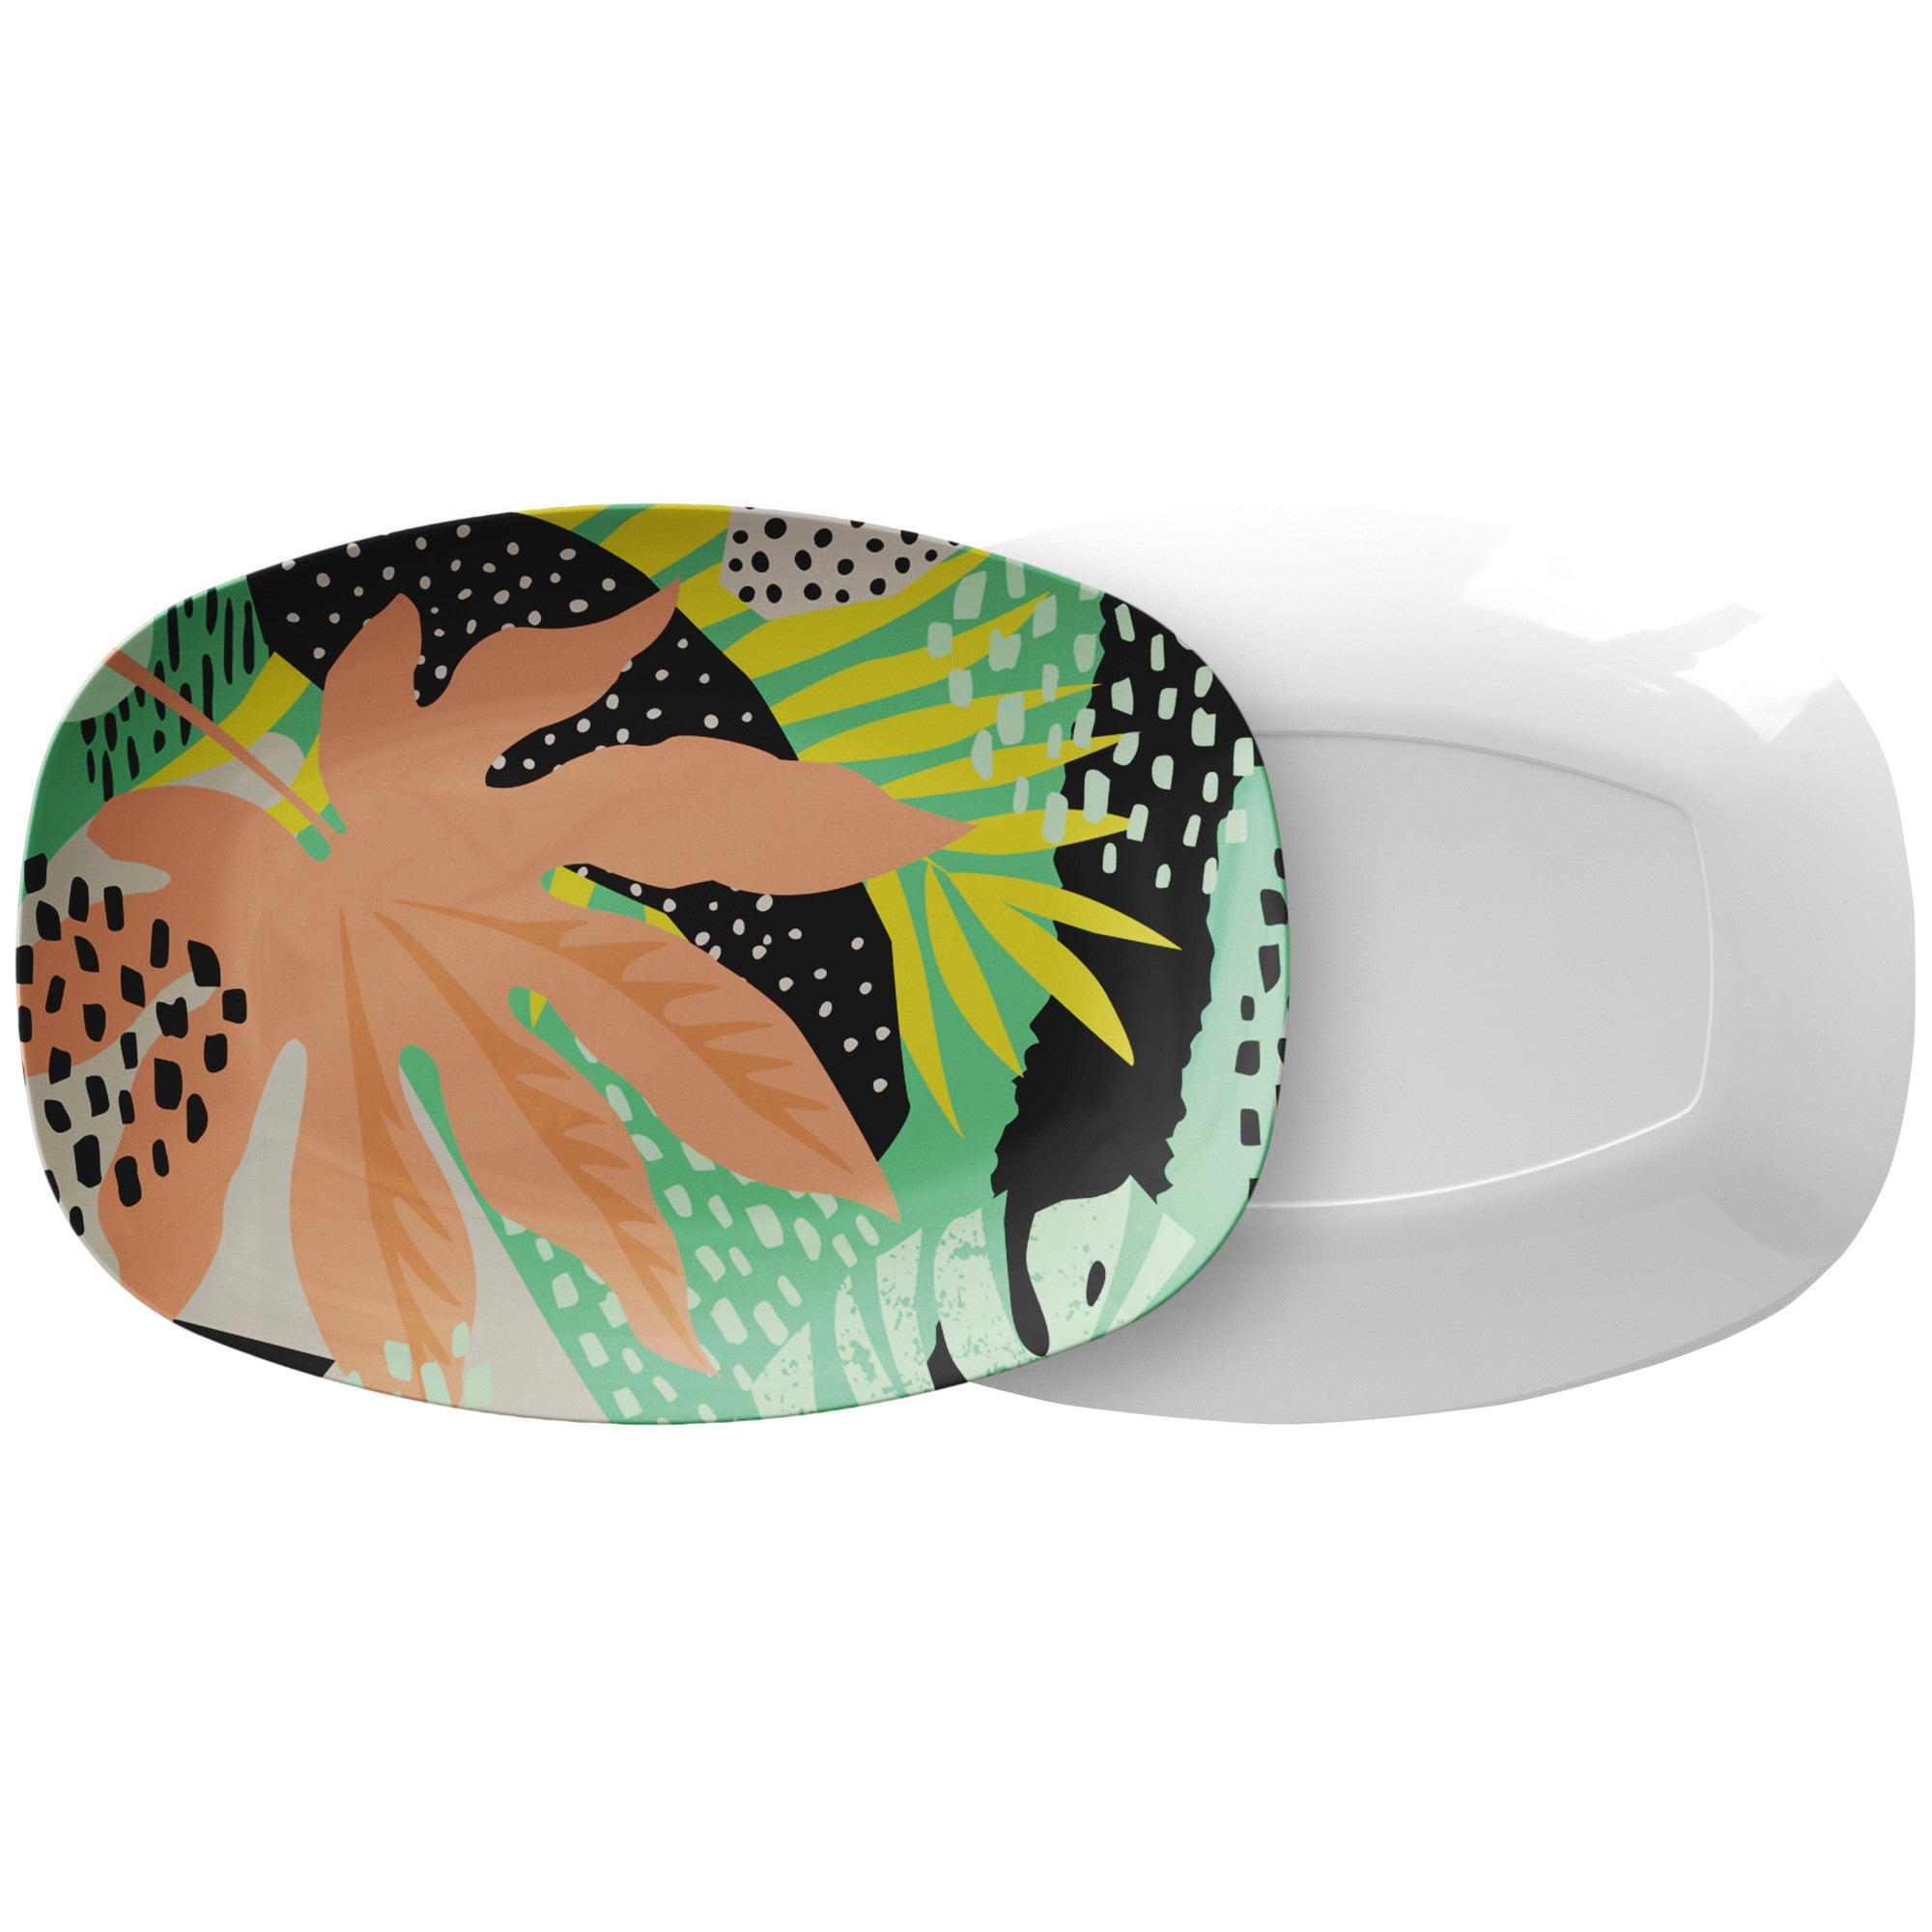 Printed Polymer Serving Platter - Tropical Print in Melon